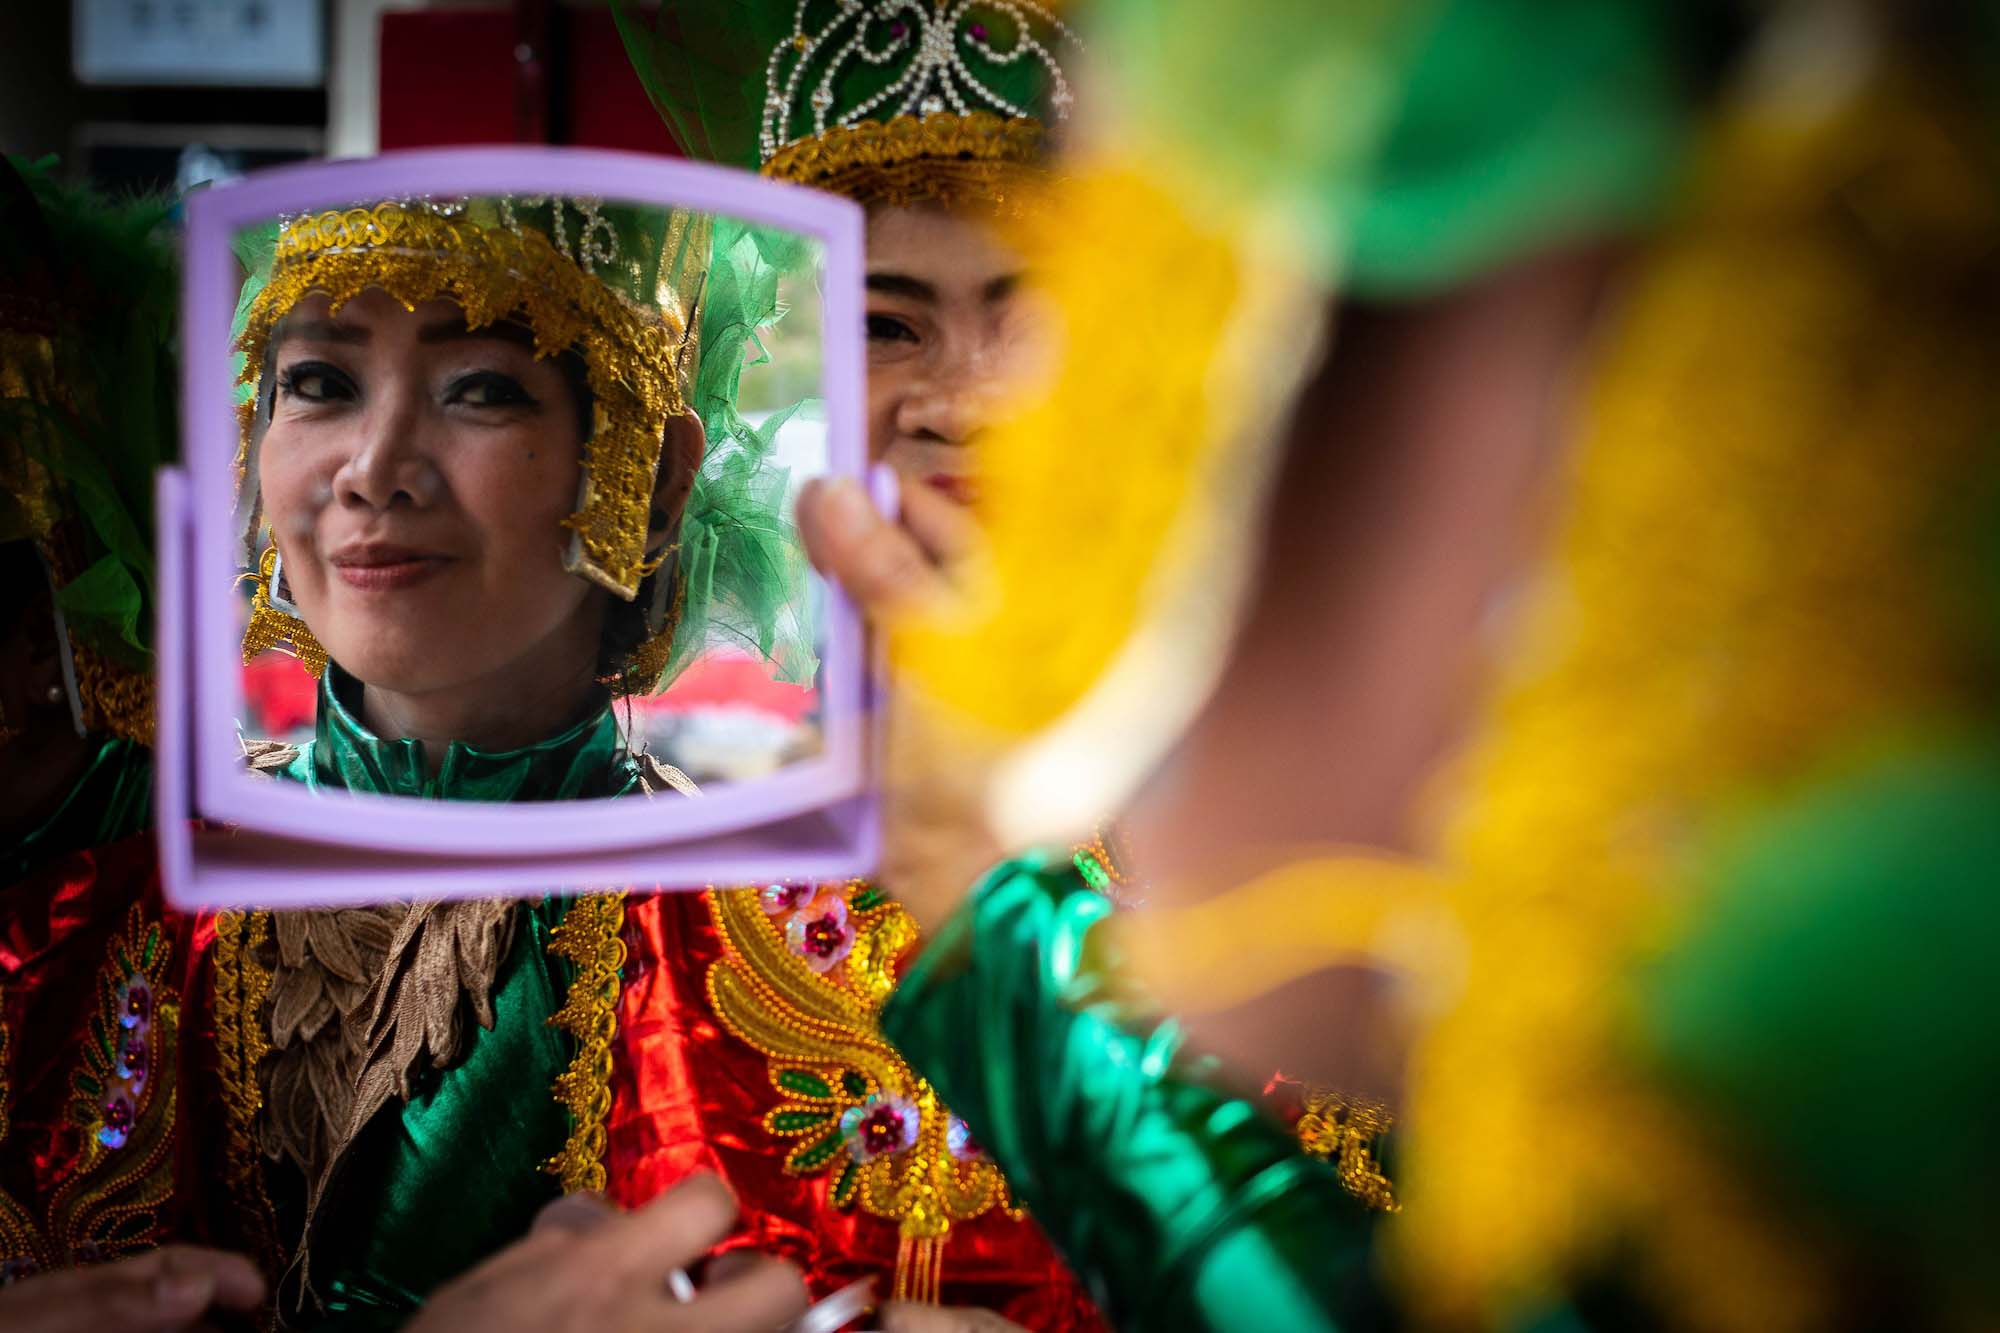 A member of the National Philippine Guardians Incorporated dance troupe checks herself in a mirror before performing at Sinulog